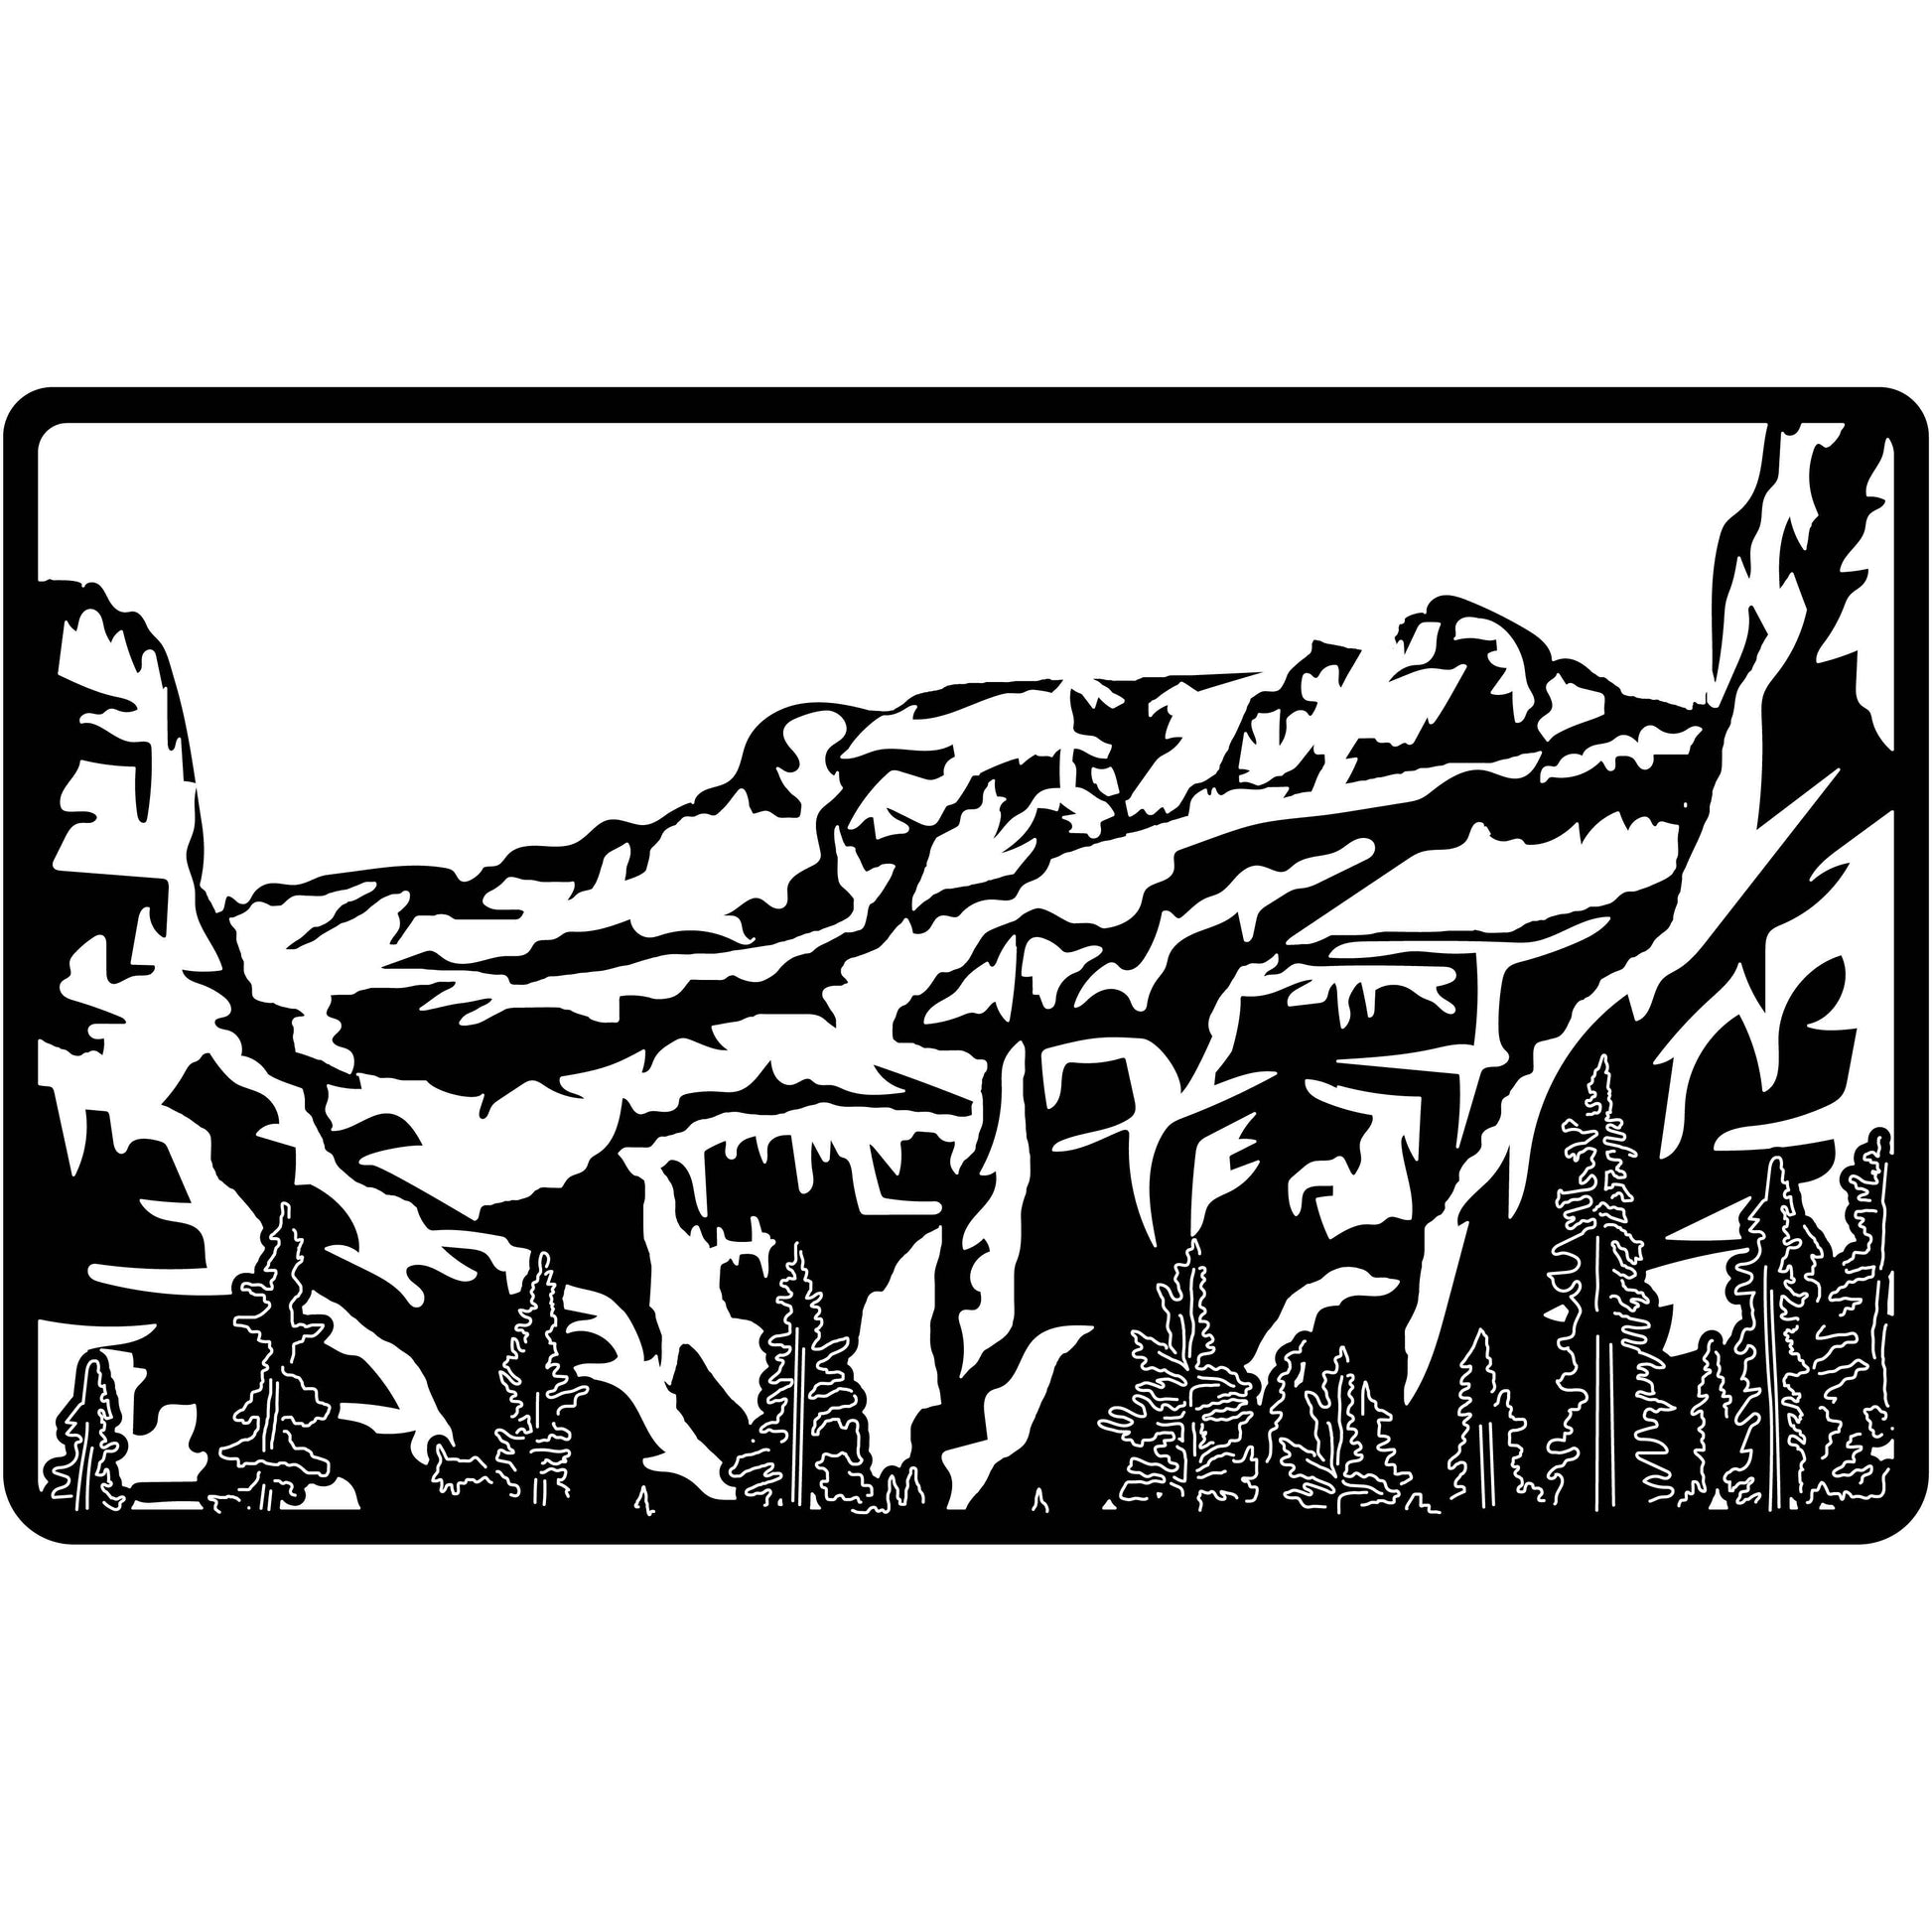 Mountain View Scene-DXF files Cut Ready for CNC-DXFforCNC.com